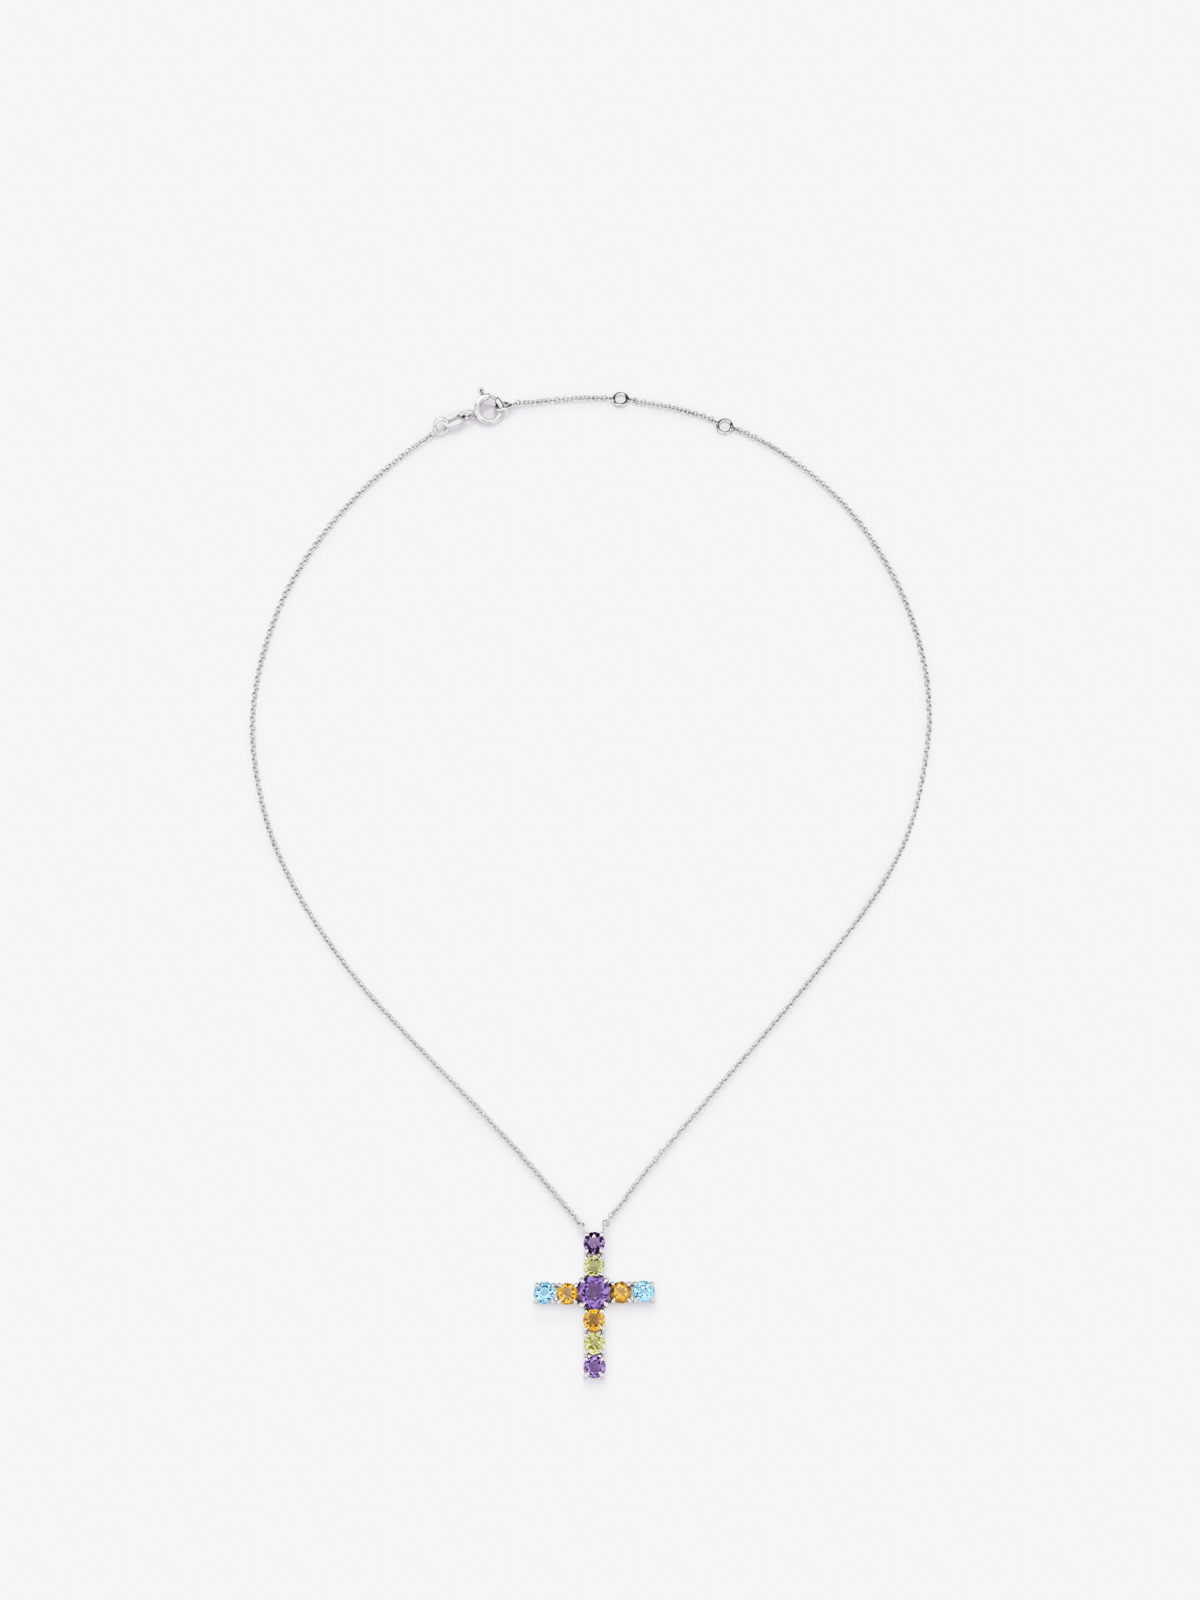 925 silver cross pendant with multicolored gems